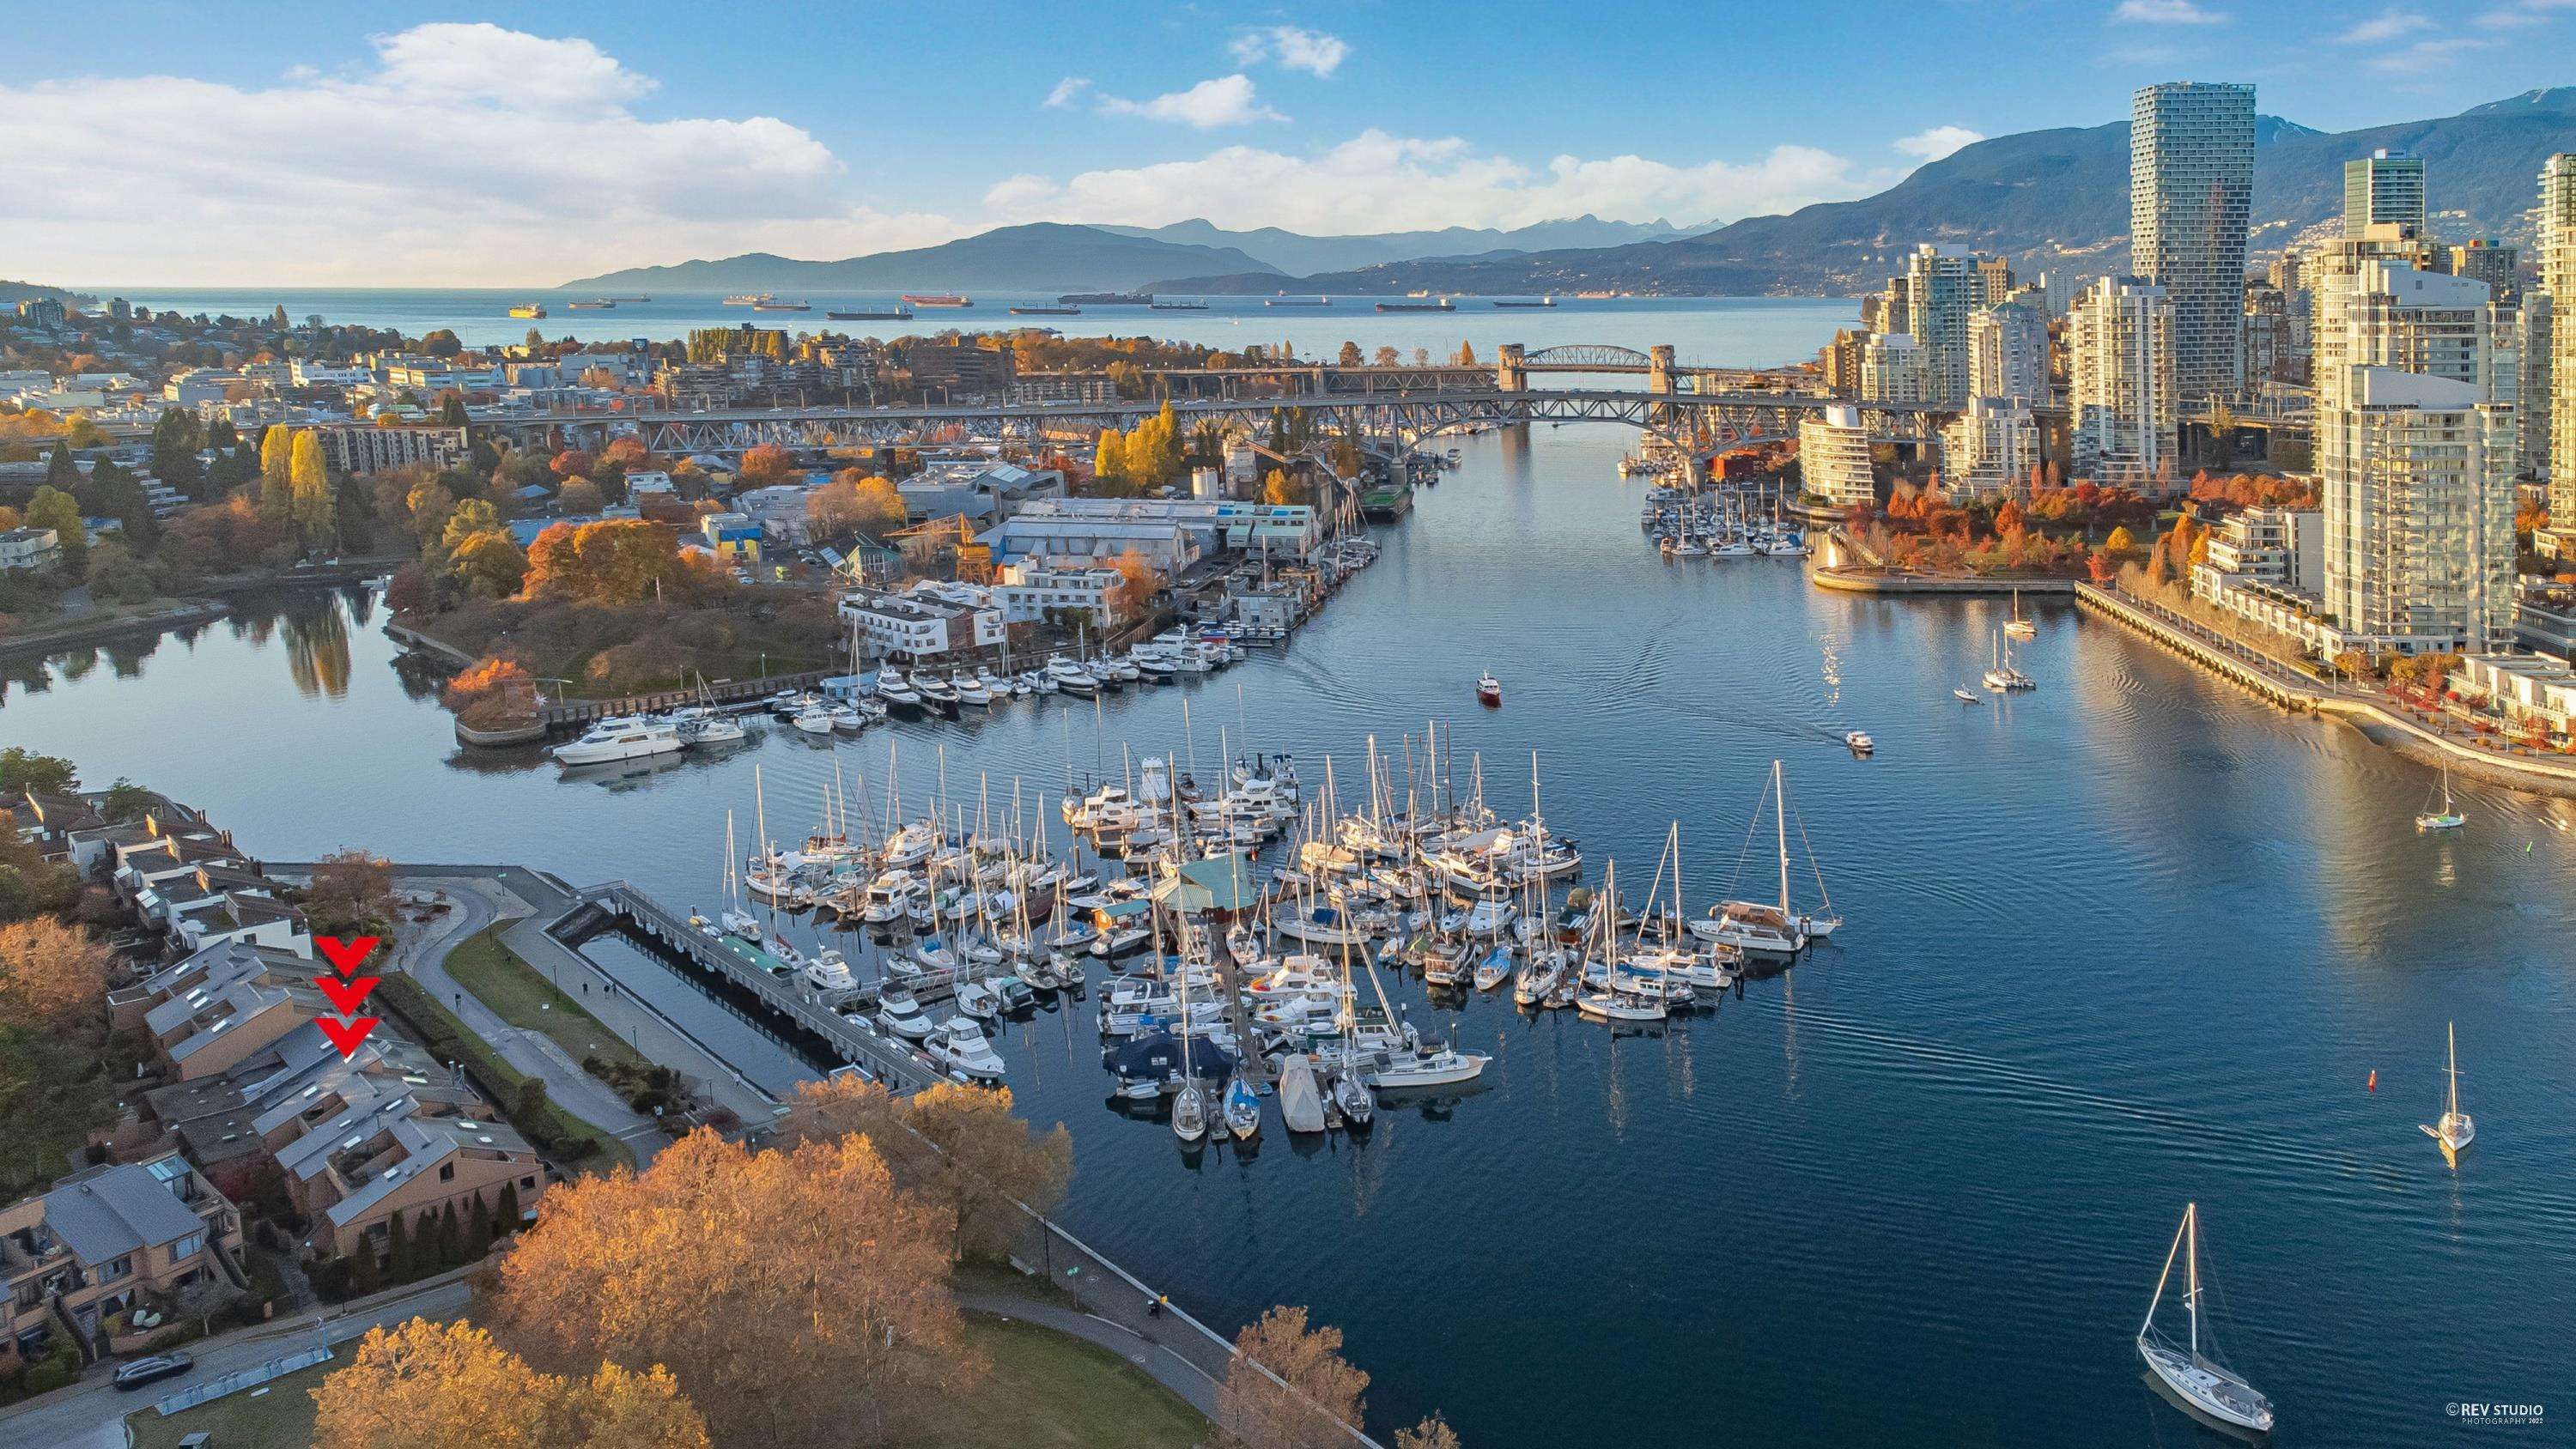 Open House. Open House on Saturday, November 26, 2022 2:00PM - 4:00PM
WATERFRONT TOWNHOUSE w/ stunning water, marina, cityscape and mtn views. 180 degree views W out to English Bay sunsets and E to the Cambie St. Bridge sunrises. Renovation by Colbrone Ar